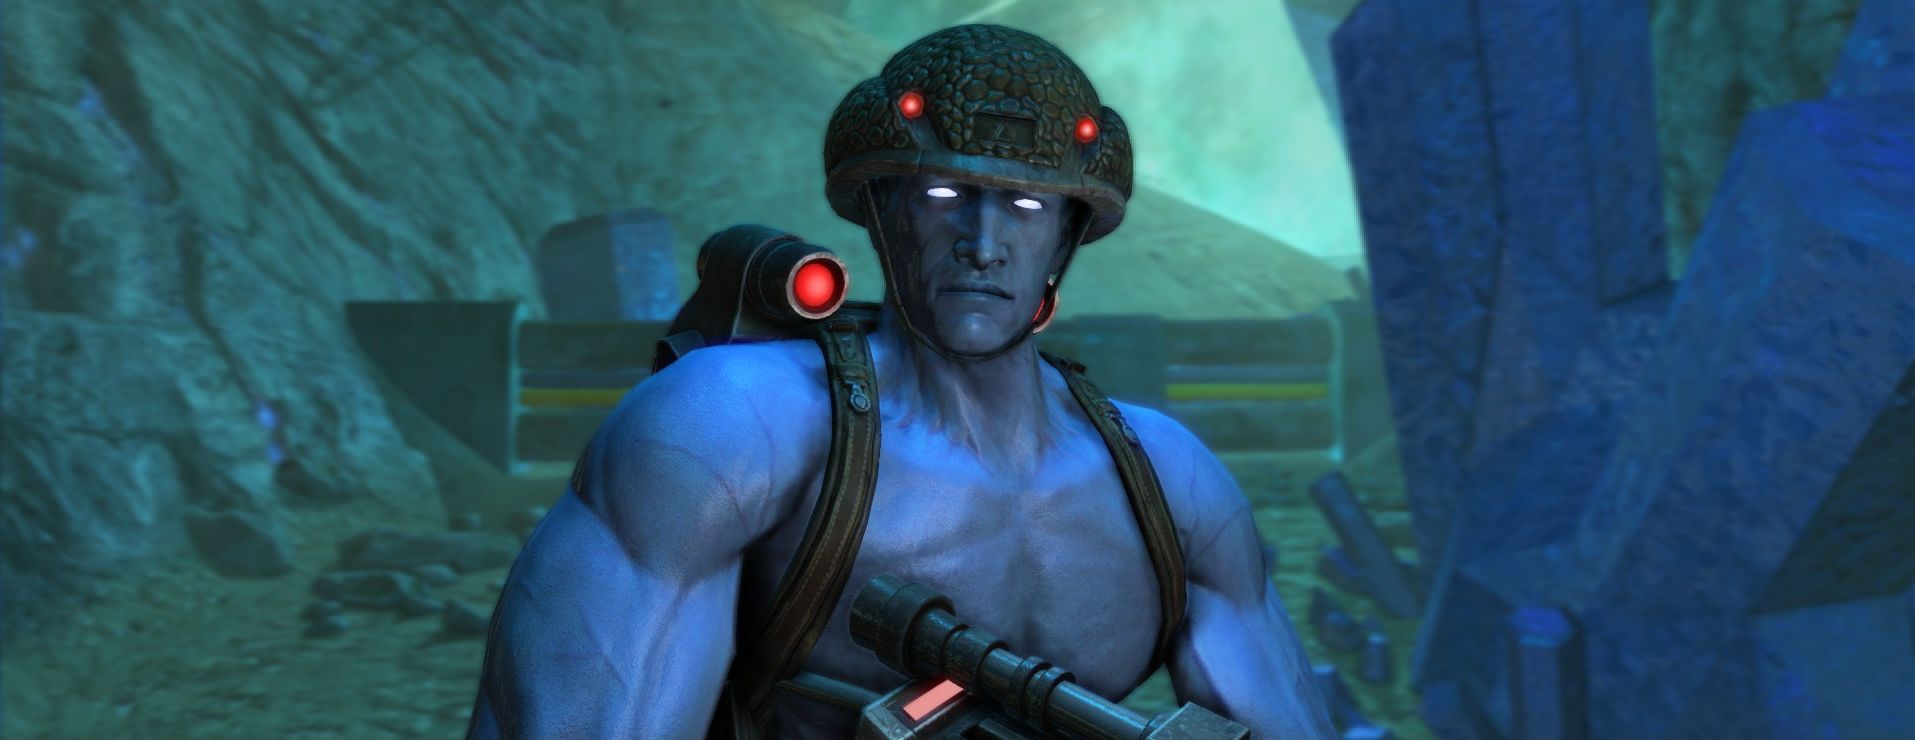 rogue trooper game wiki